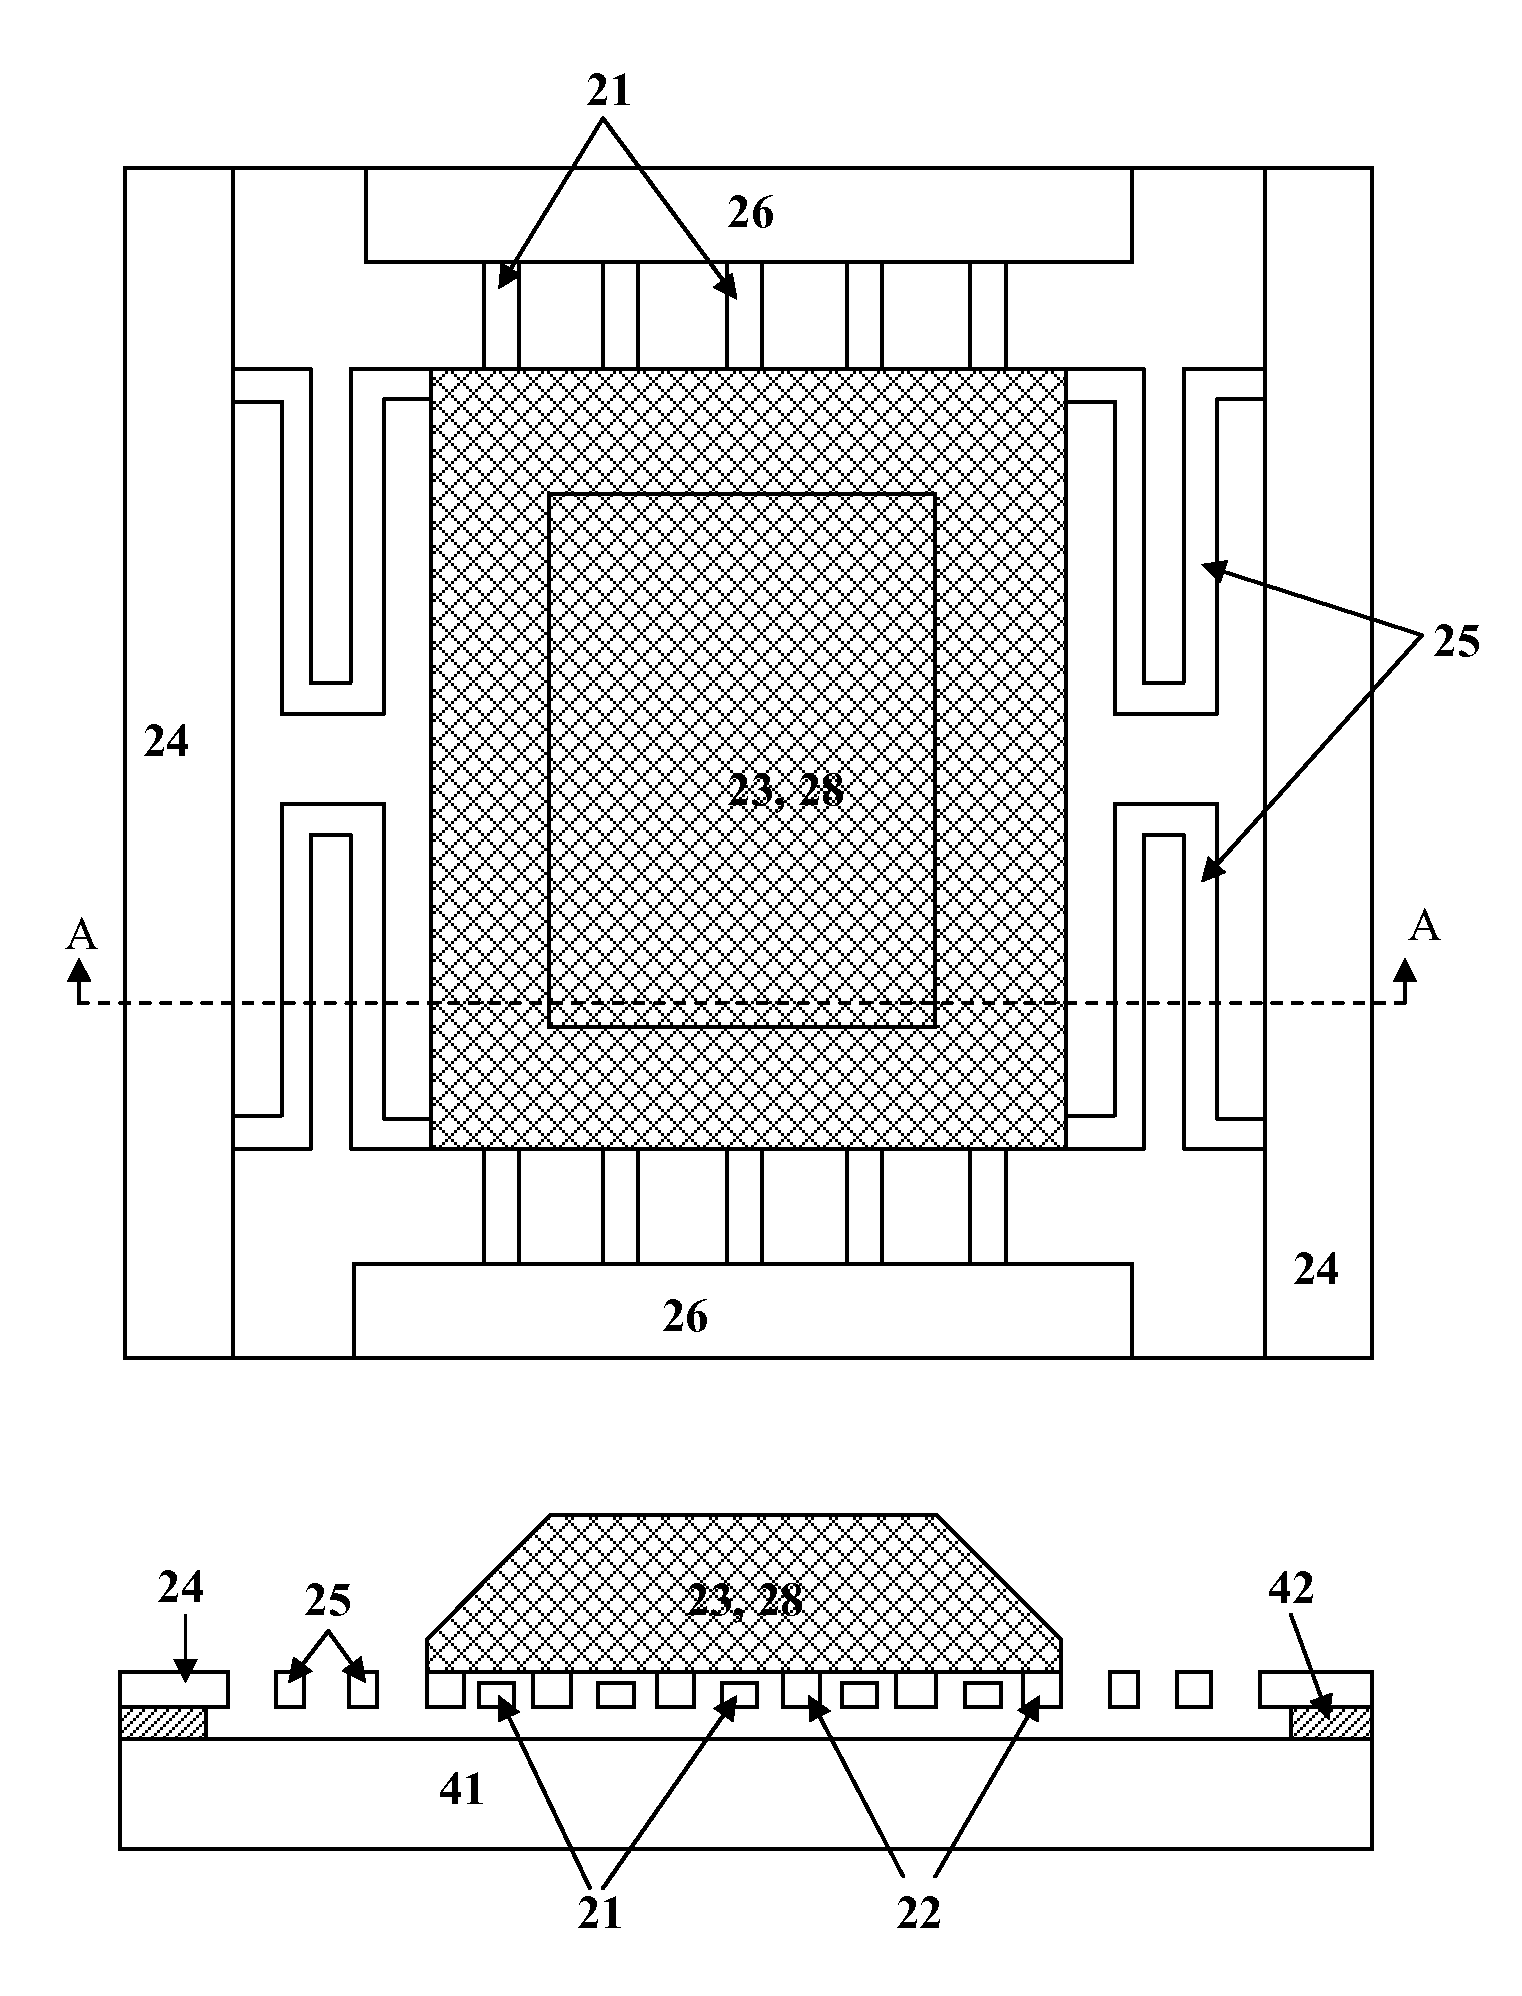 Microstructure with enlarged mass and electrode area for kinetic to electrical energy conversion